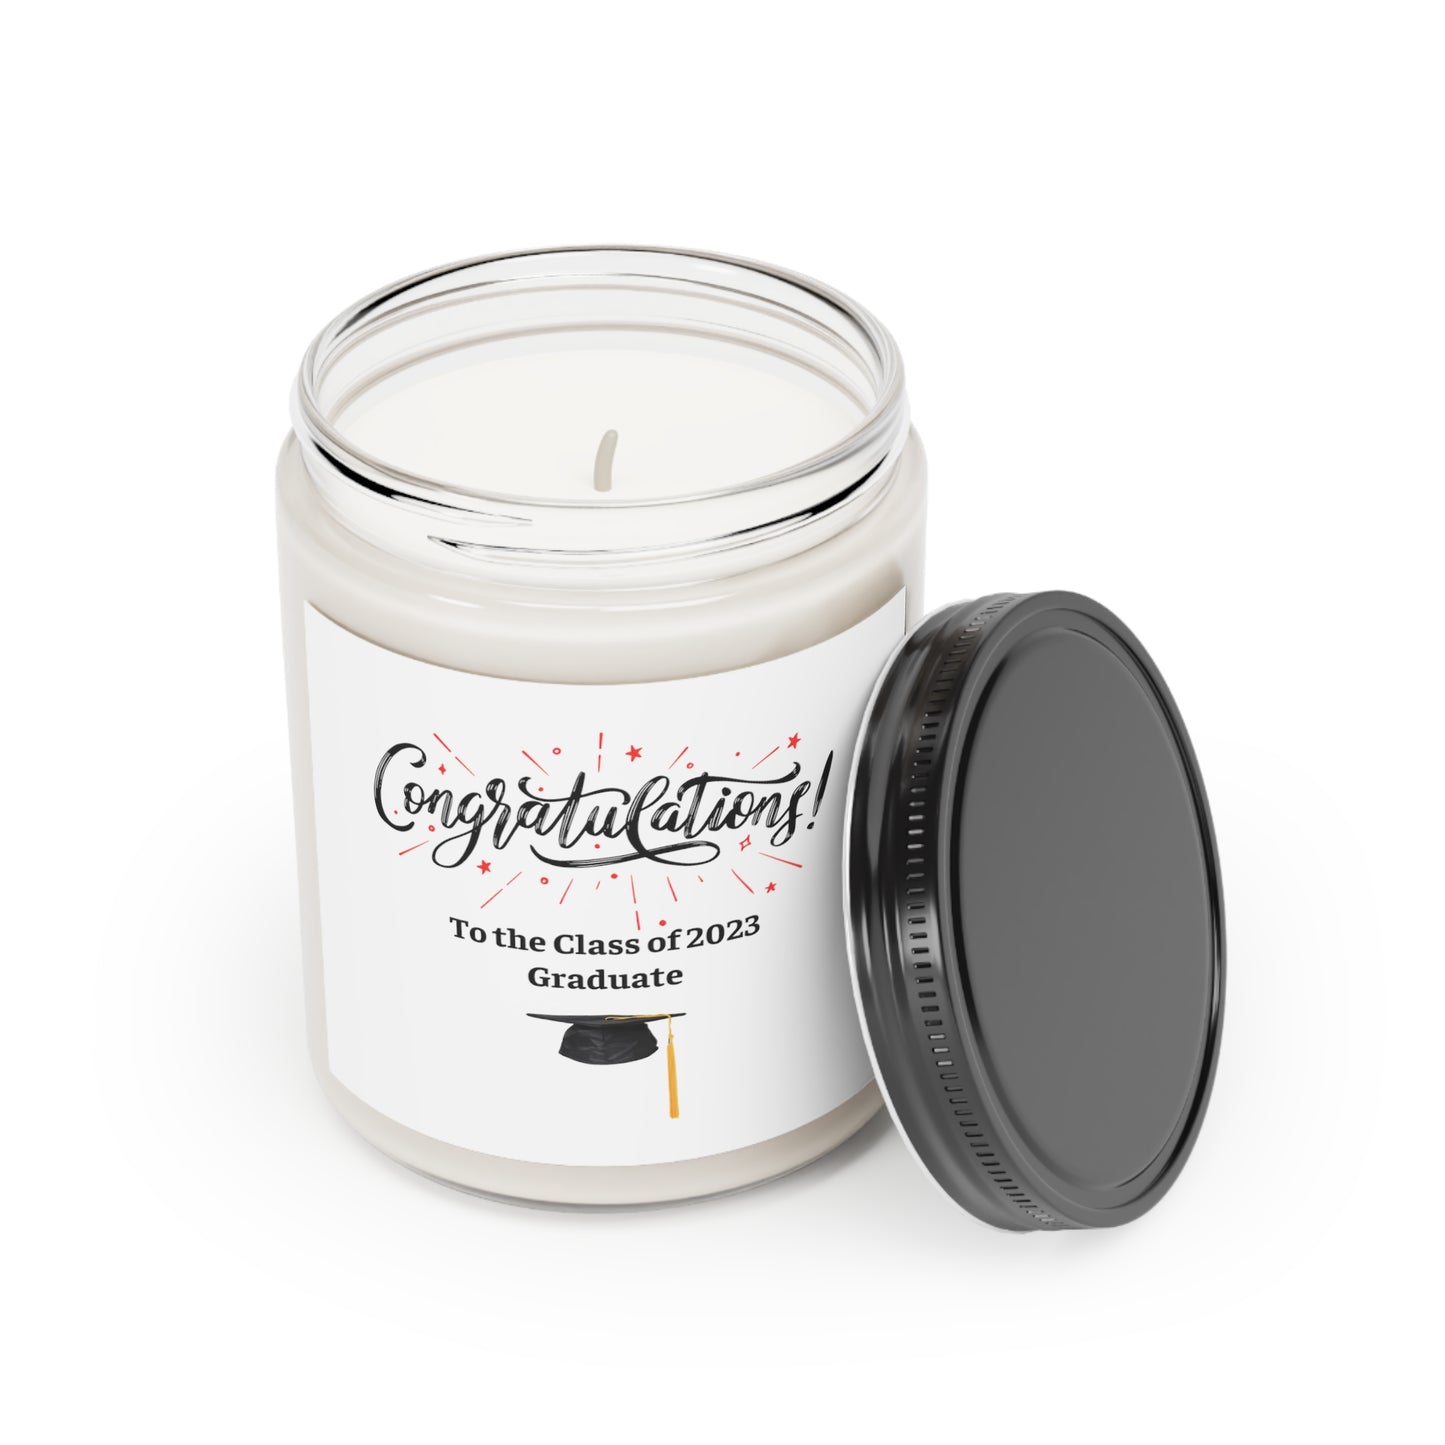 Candle for Graduate: Scented; 9 oz.; Soy wax; Glass jar